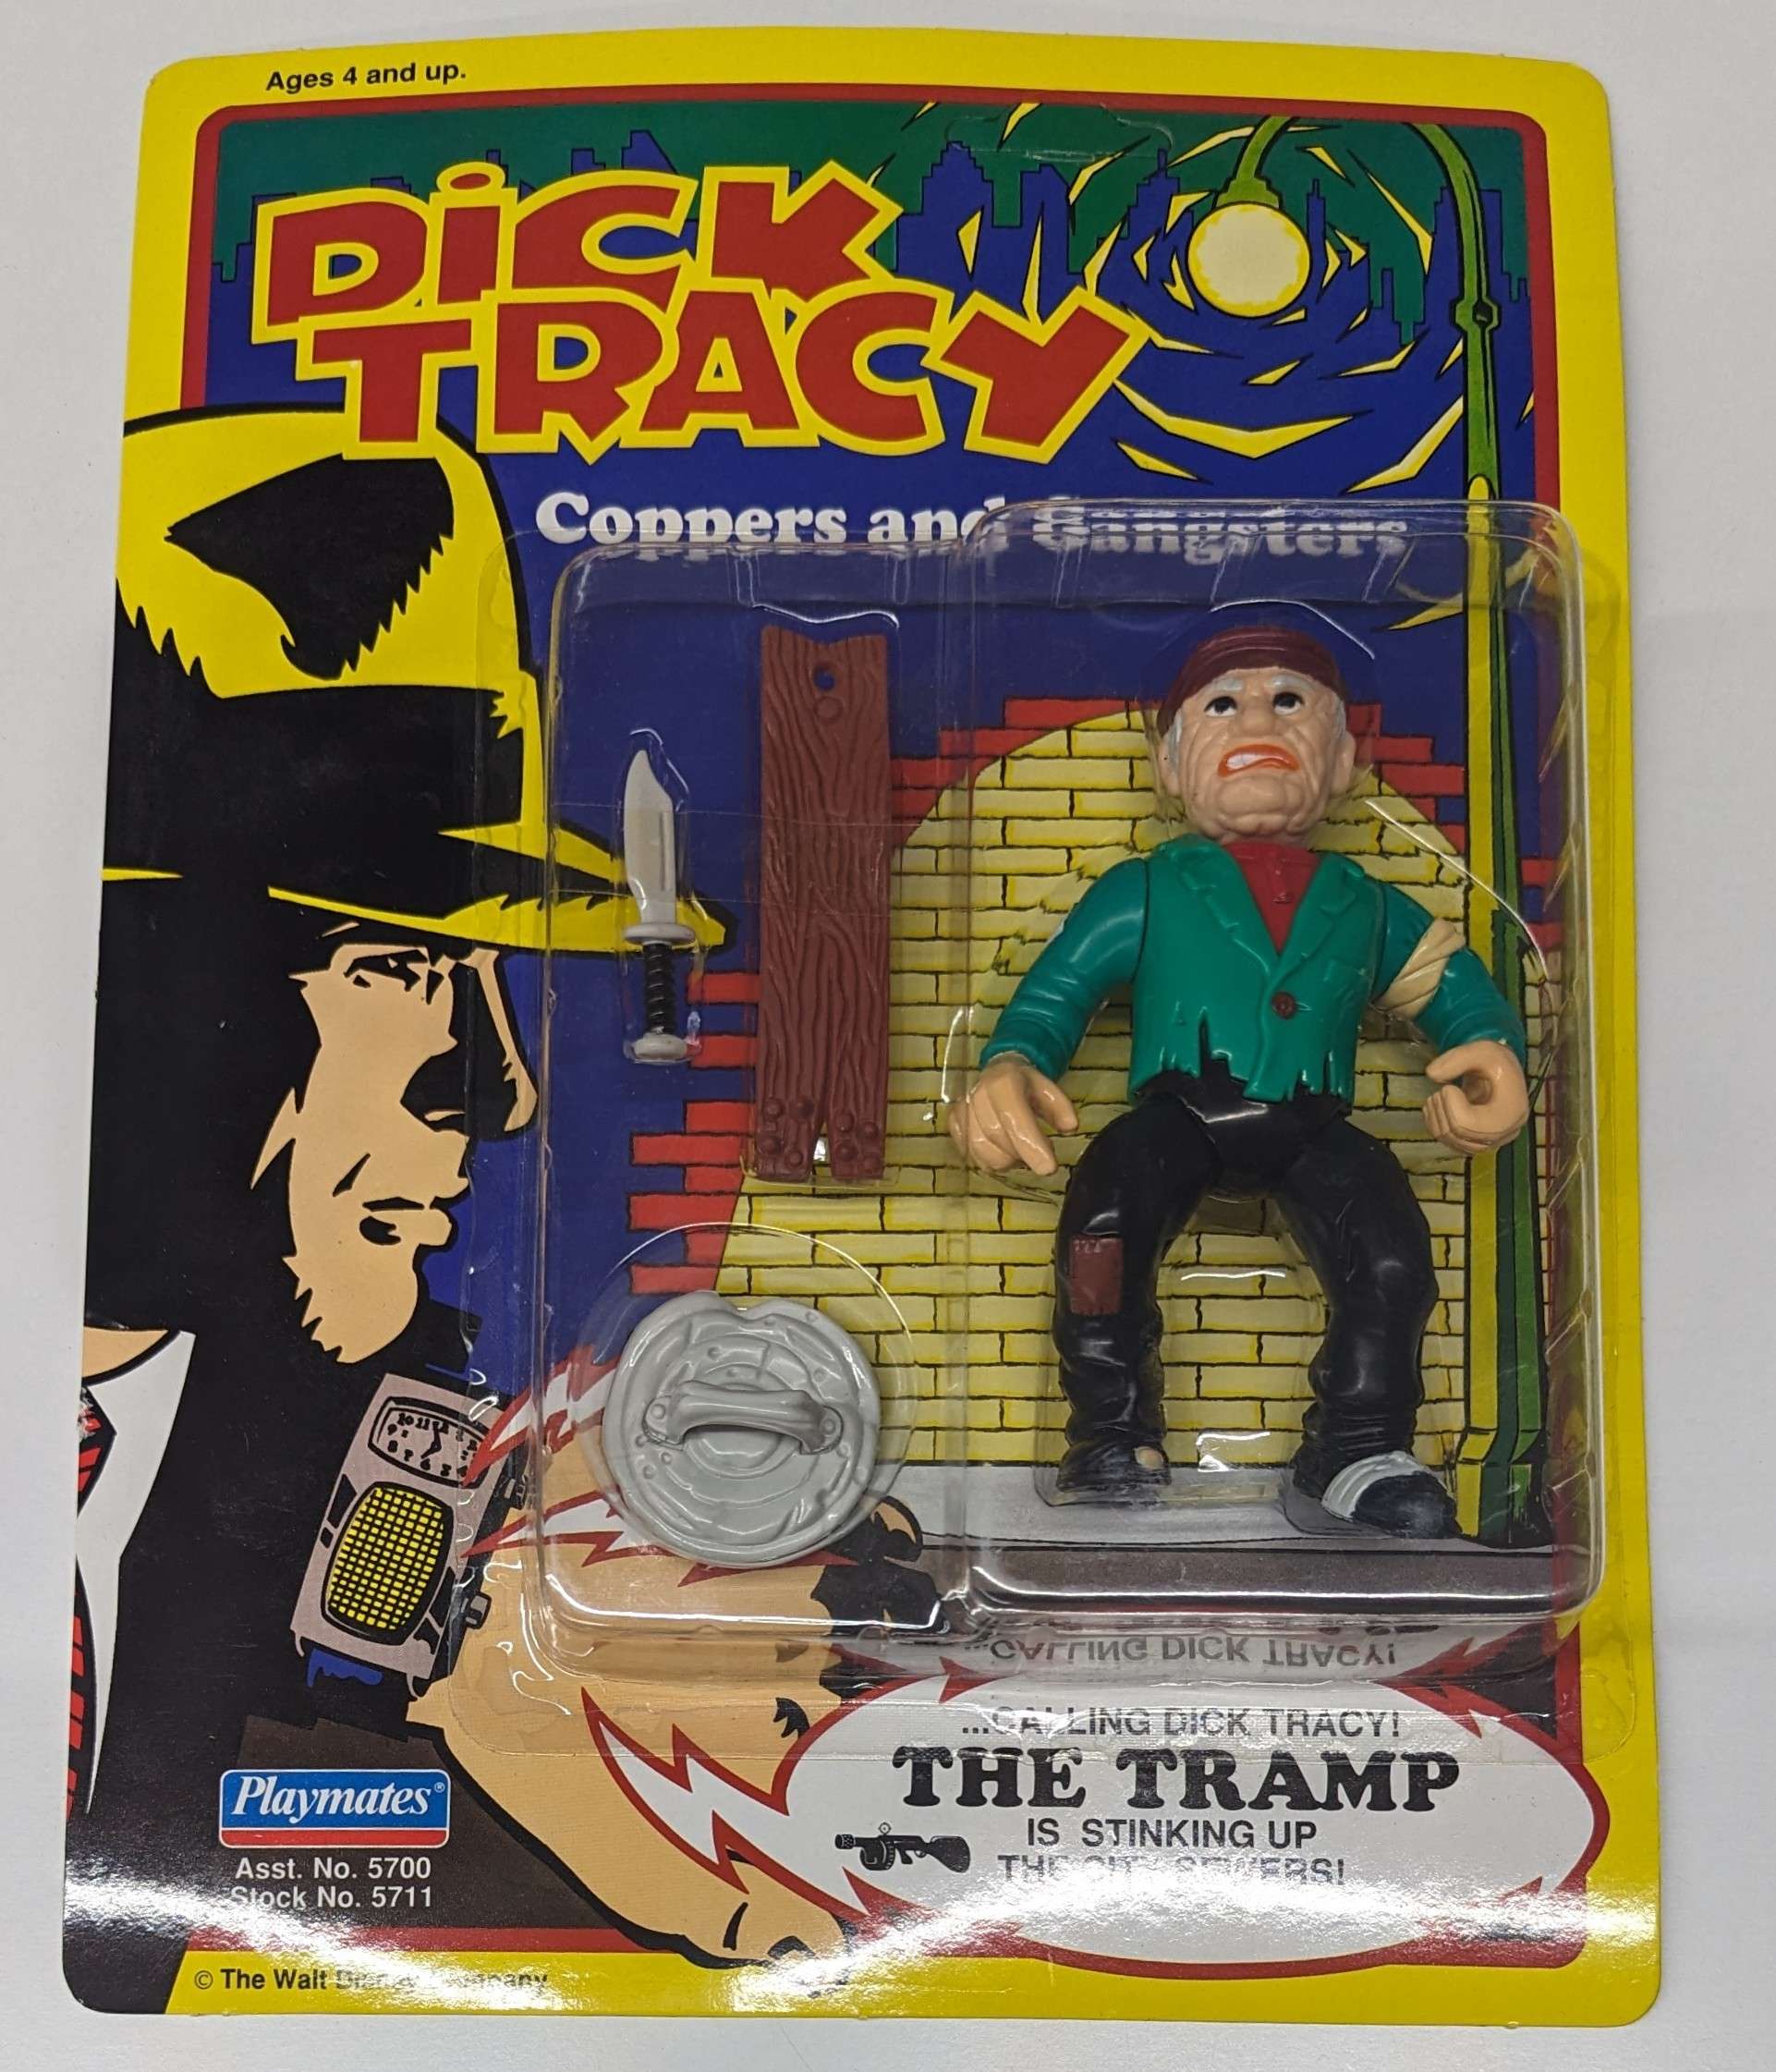 Dick Tracy: Coppers and Gangsters Playmates The Tramp Action Figure